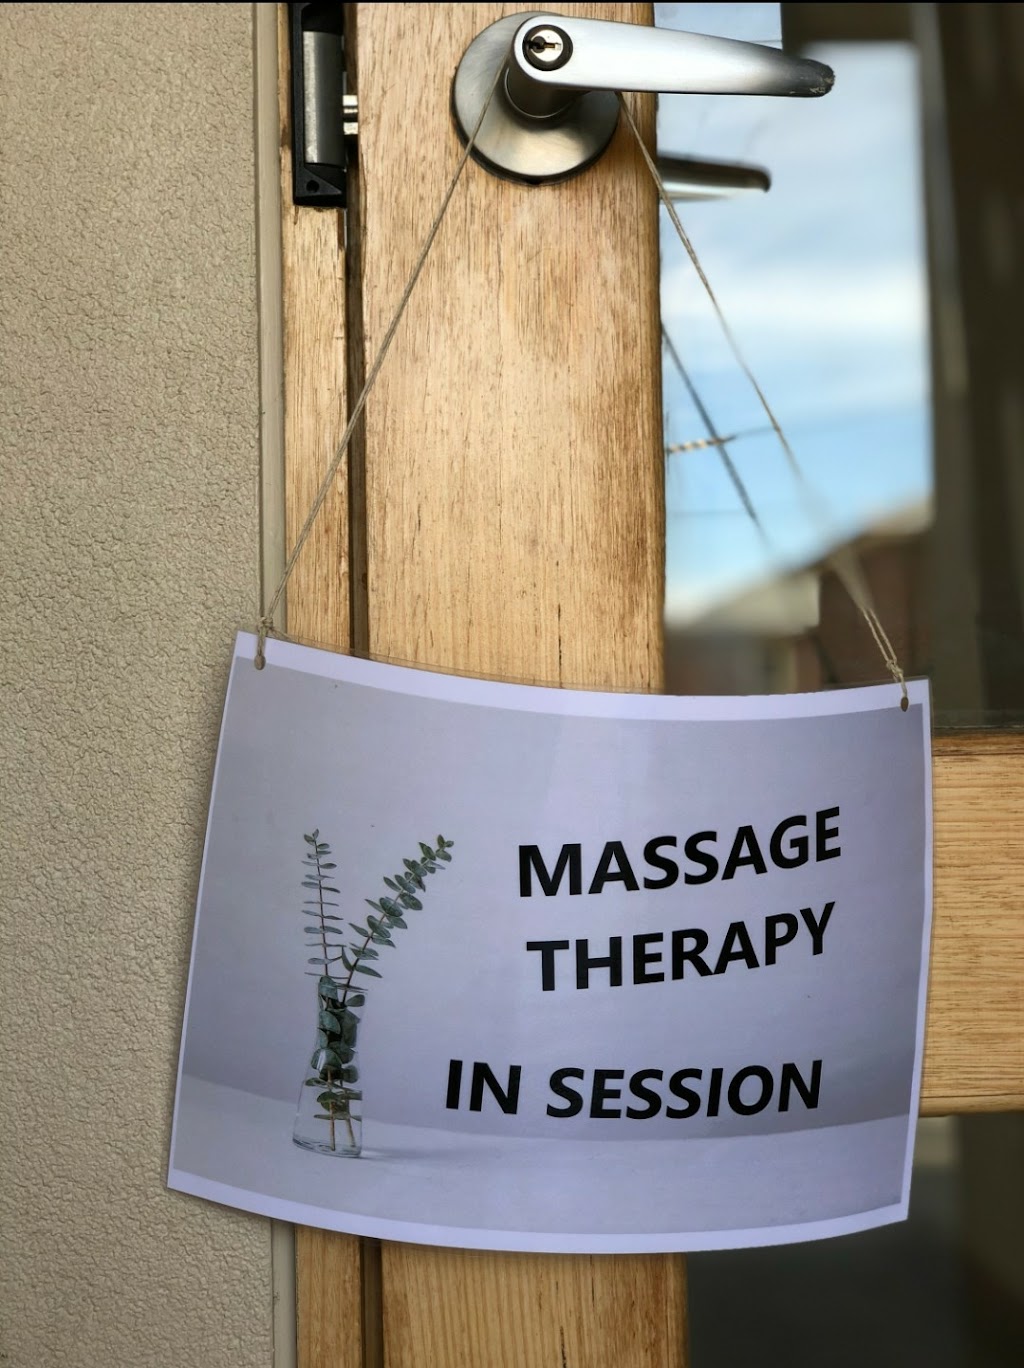 The Massage Flair |  | 128A Roberts St, Yarraville VIC 3013, Australia | 0466255326 OR +61 466 255 326